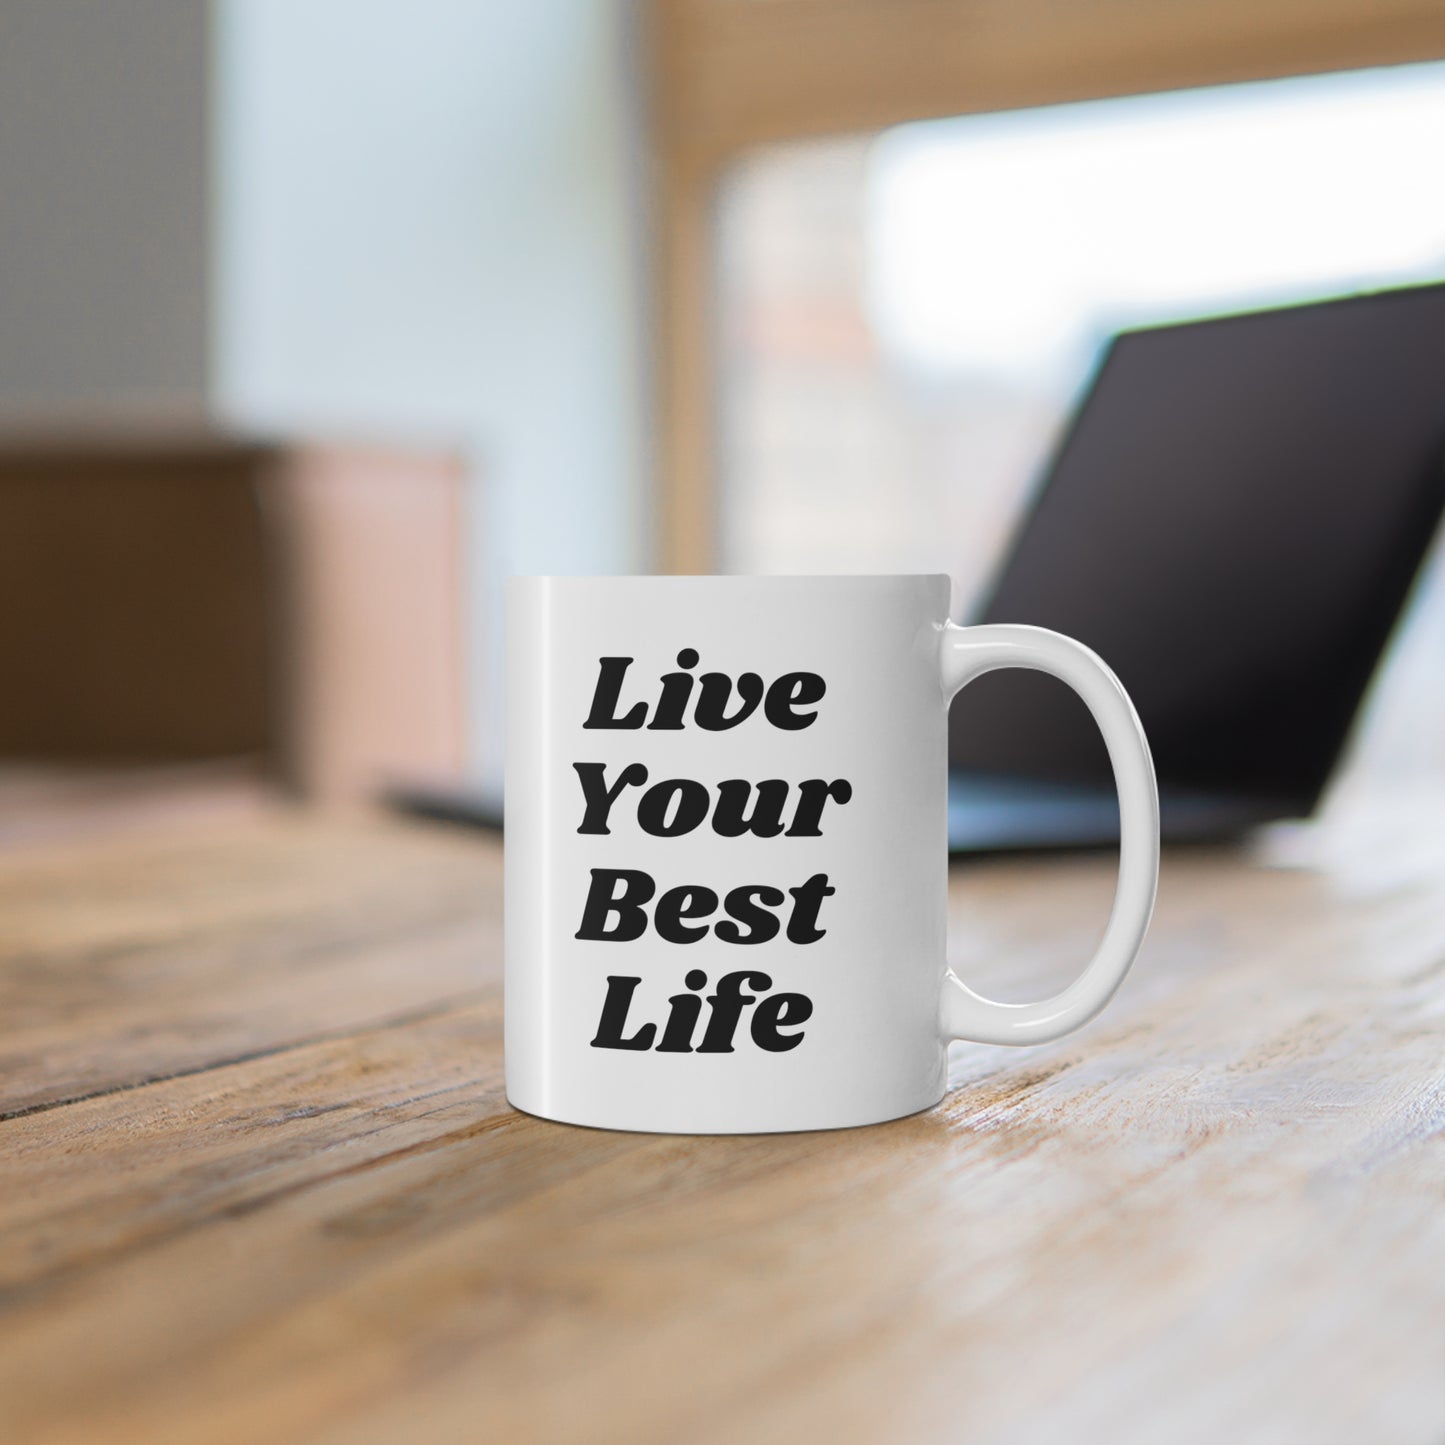 11oz ceramic mug with quote Live Your Best Life